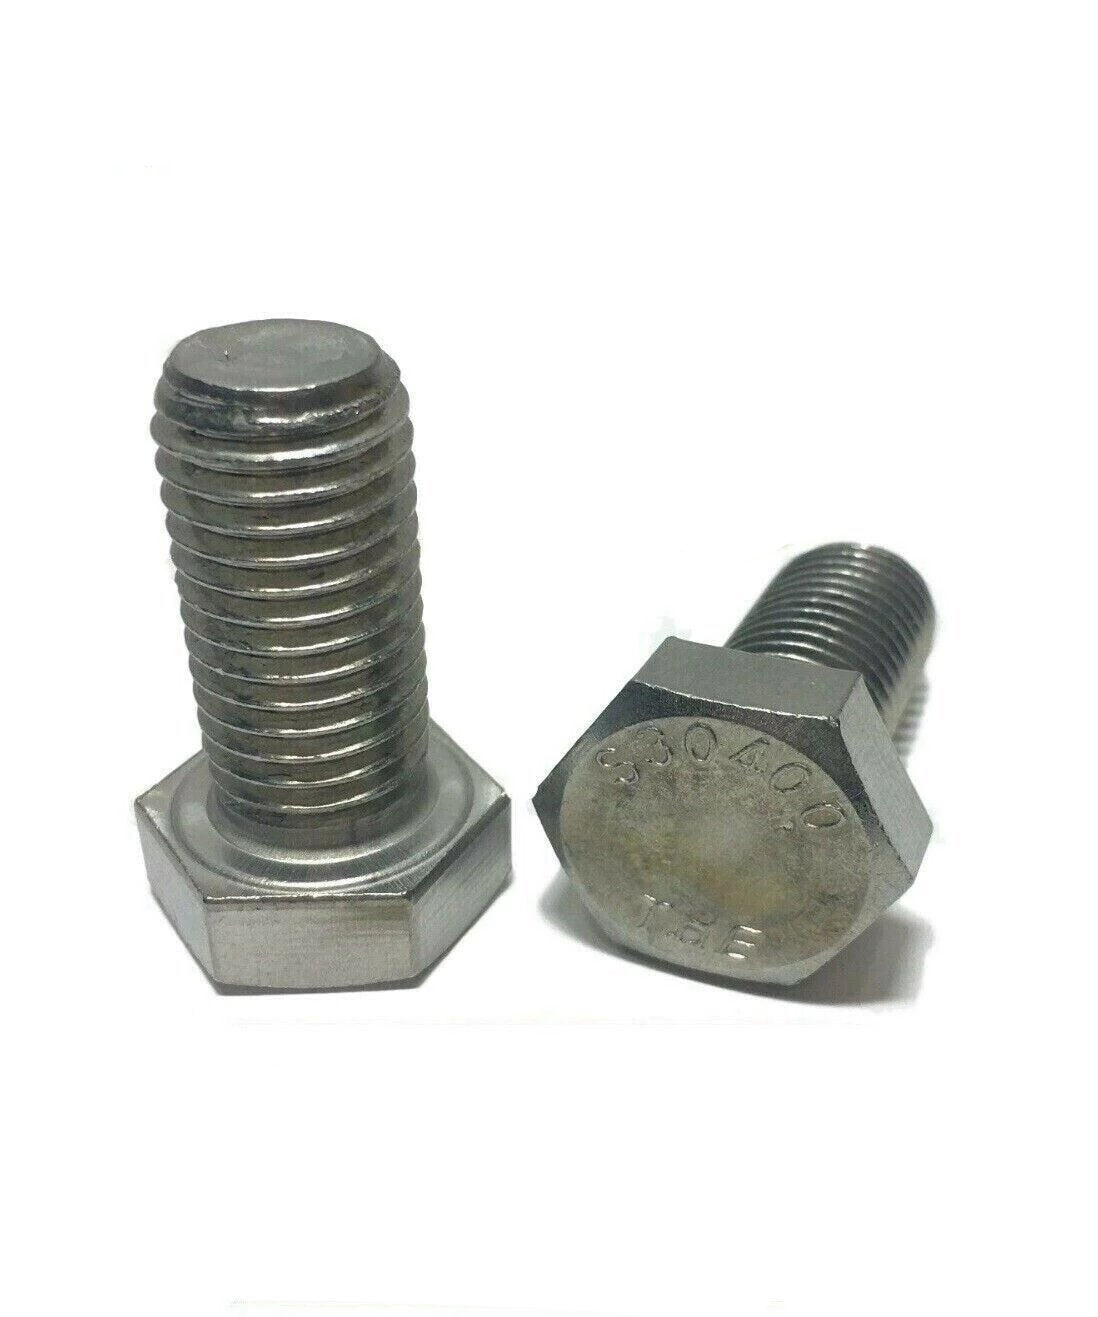 3/8"-16 x 1 1/4" Stainless Steel Hex Cap Screw / Tap Bolt 18-8 / 304